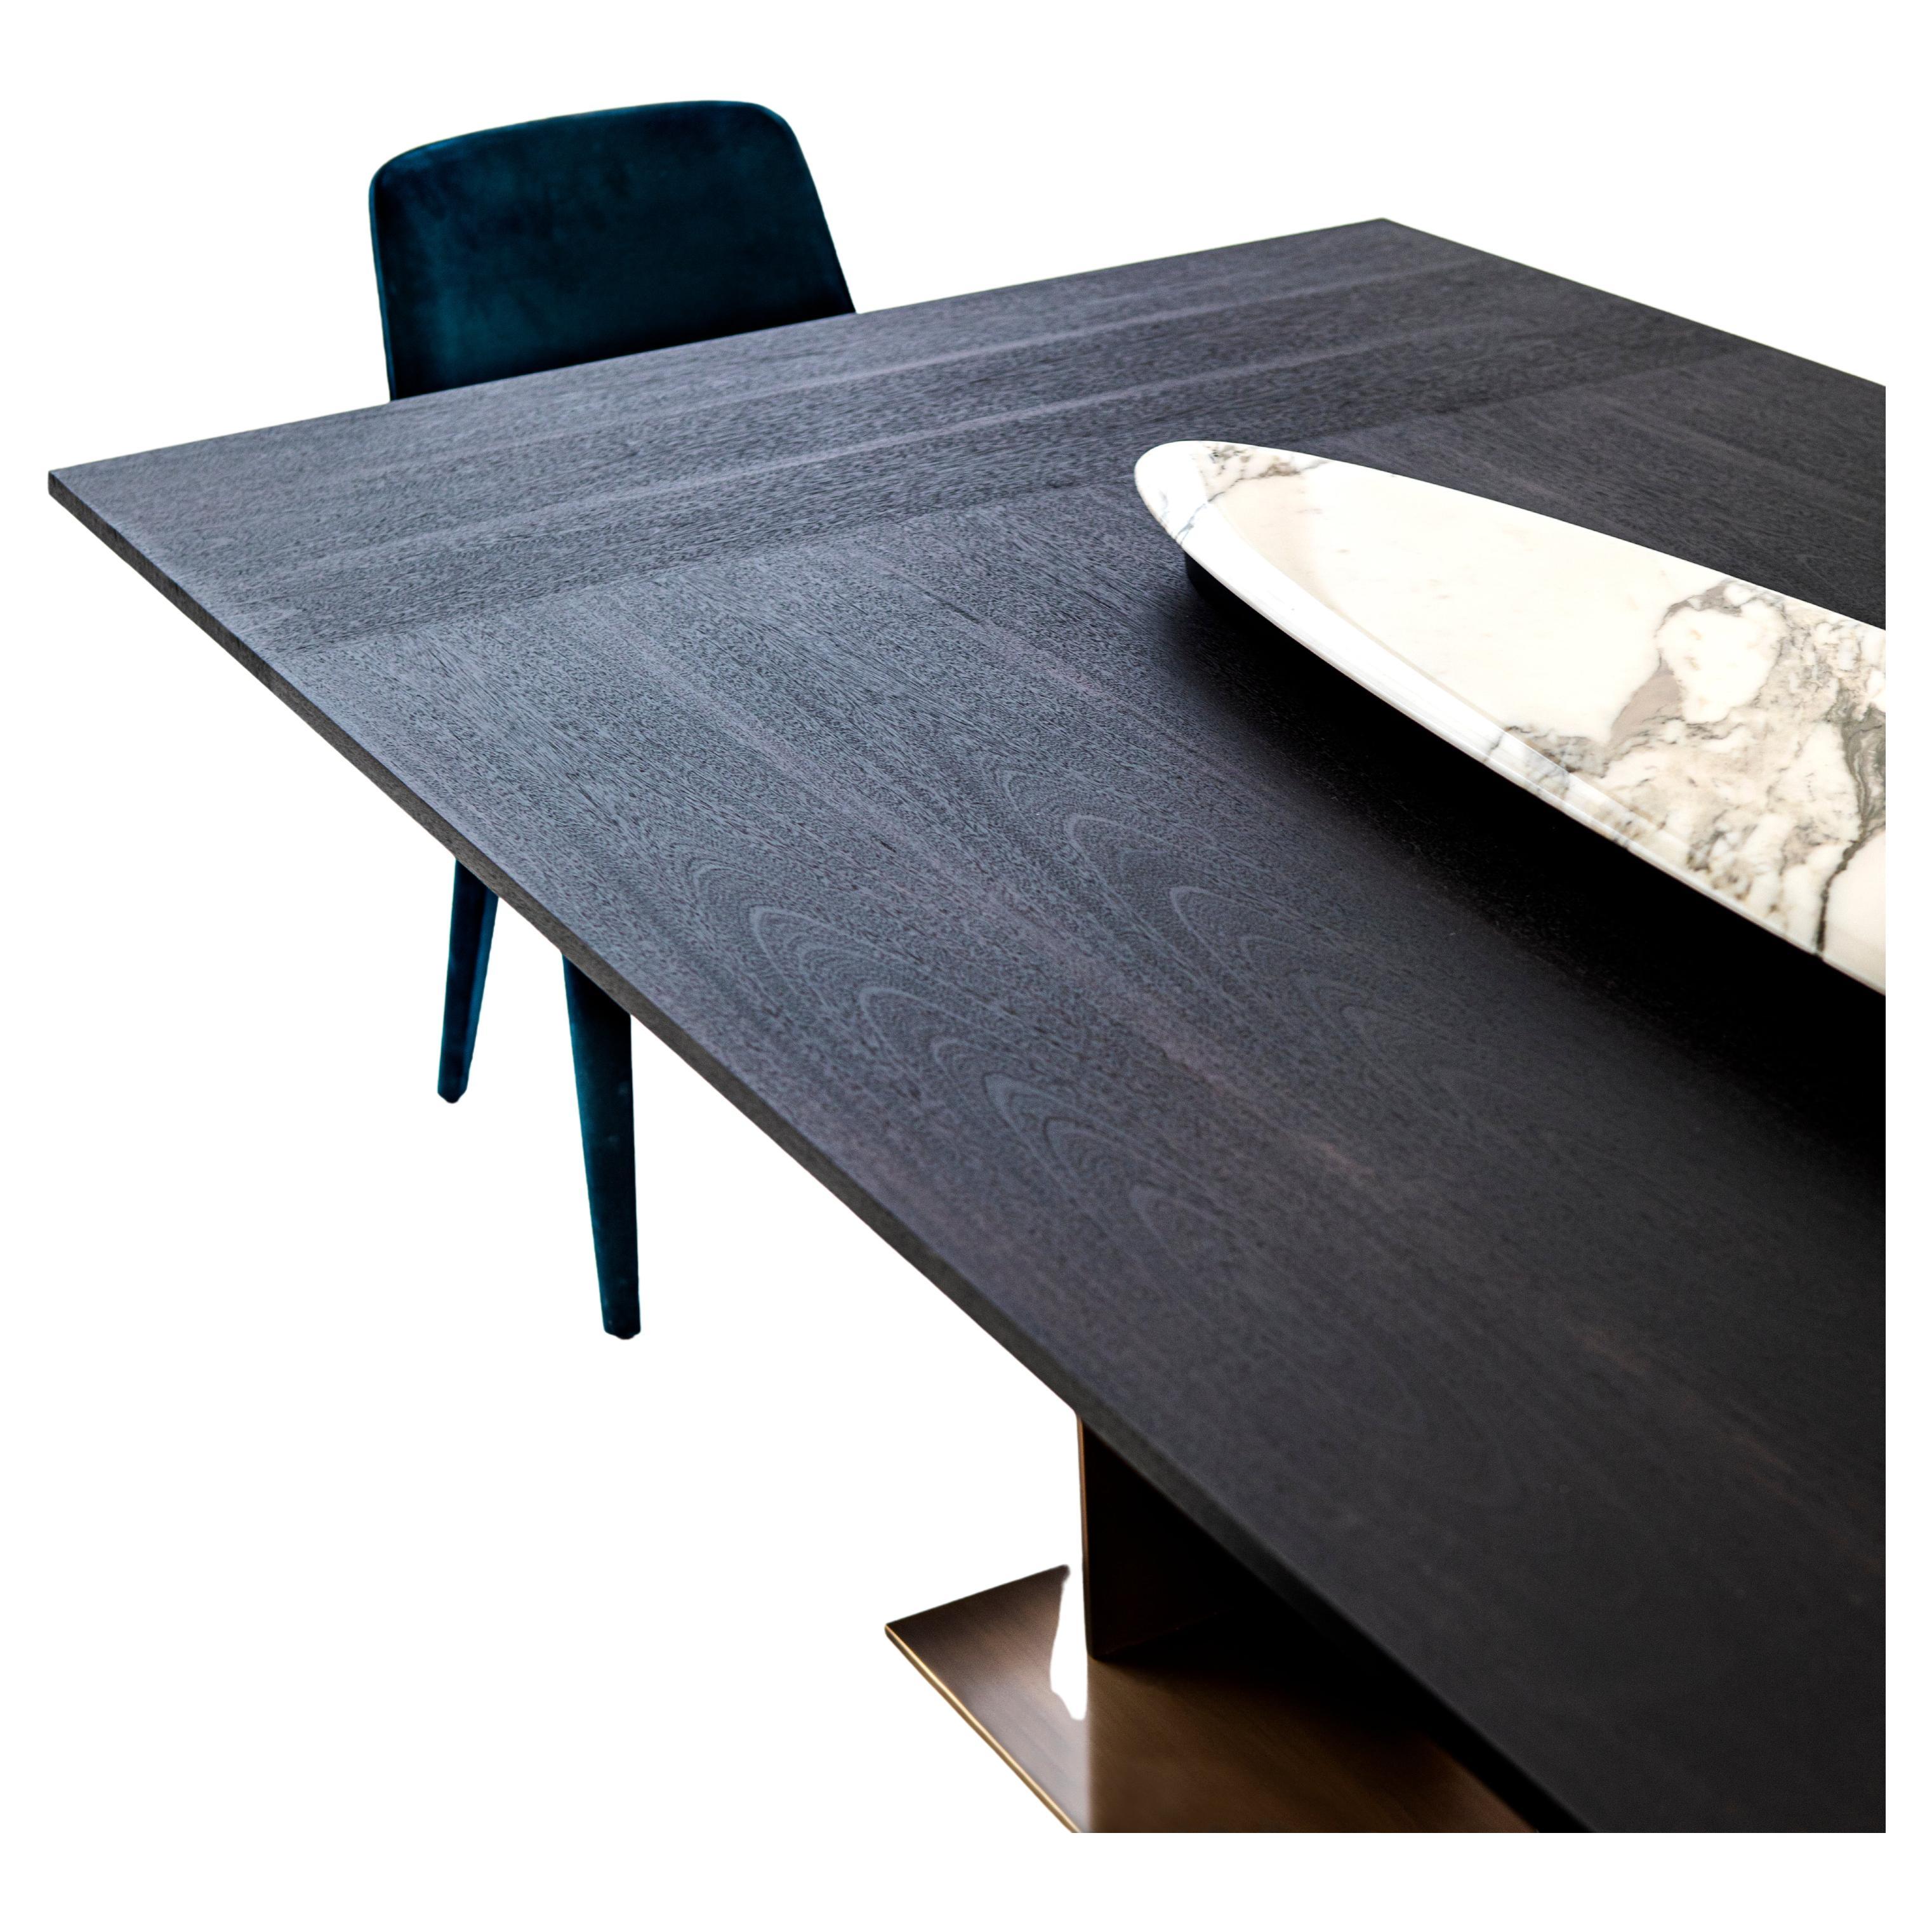 A family of tables inspired by the Modern Movement, in particular the formal rigour of Mies van der Rohe and the free compositions of Gerrit T. Rietveld, in the layout of the right-angled thin metal blades which make up the base.

The table top,